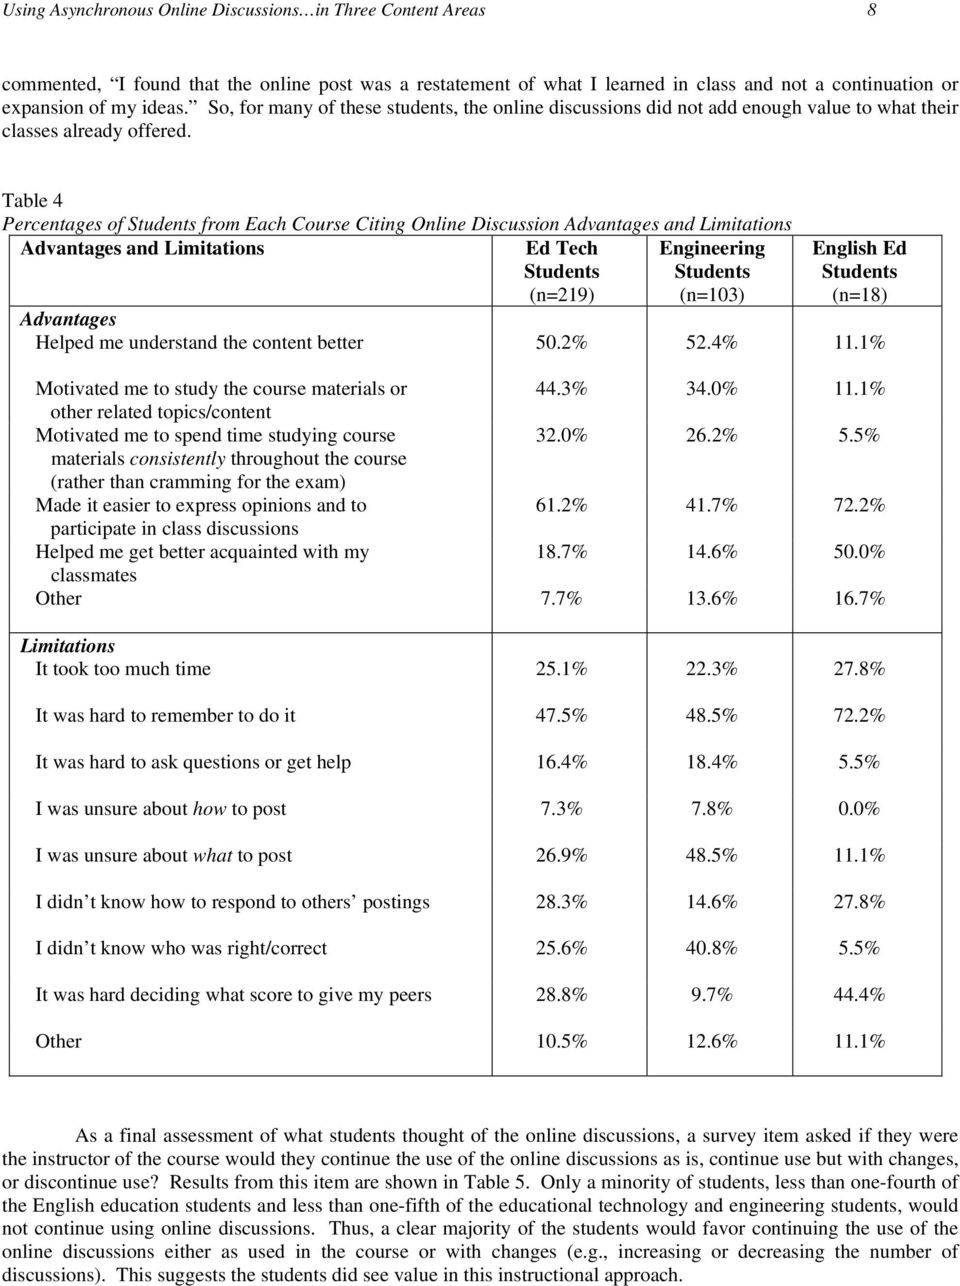 Table 4 Percentages of Students from Each Course Citing Online Discussion Advantages and Limitations Advantages and Limitations Ed Tech Students (n=219) Engineering Students (n=103) English Ed